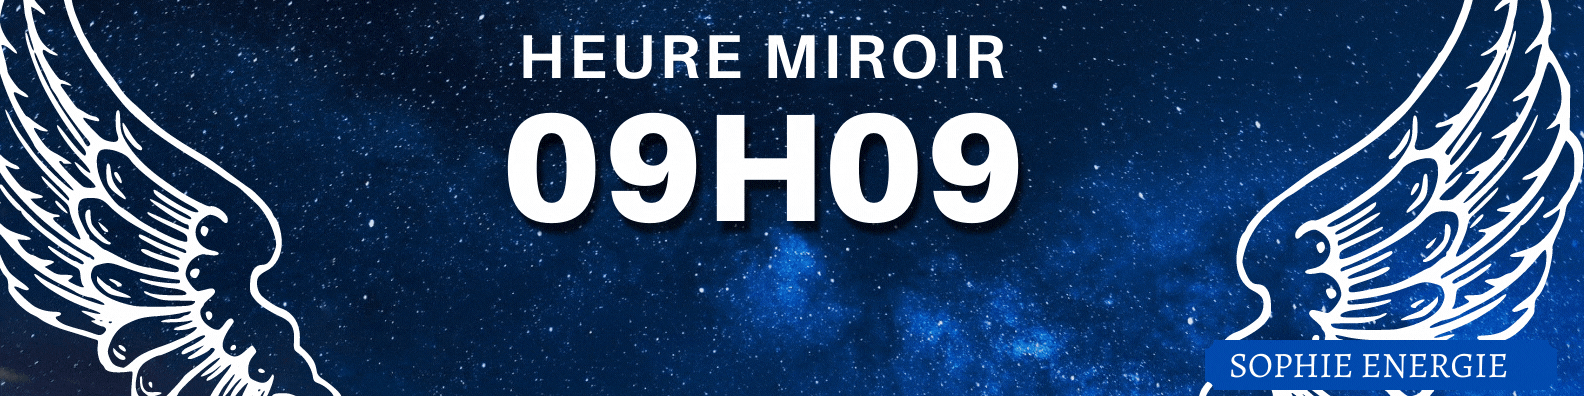 HEURE MIROIR anges 09h09